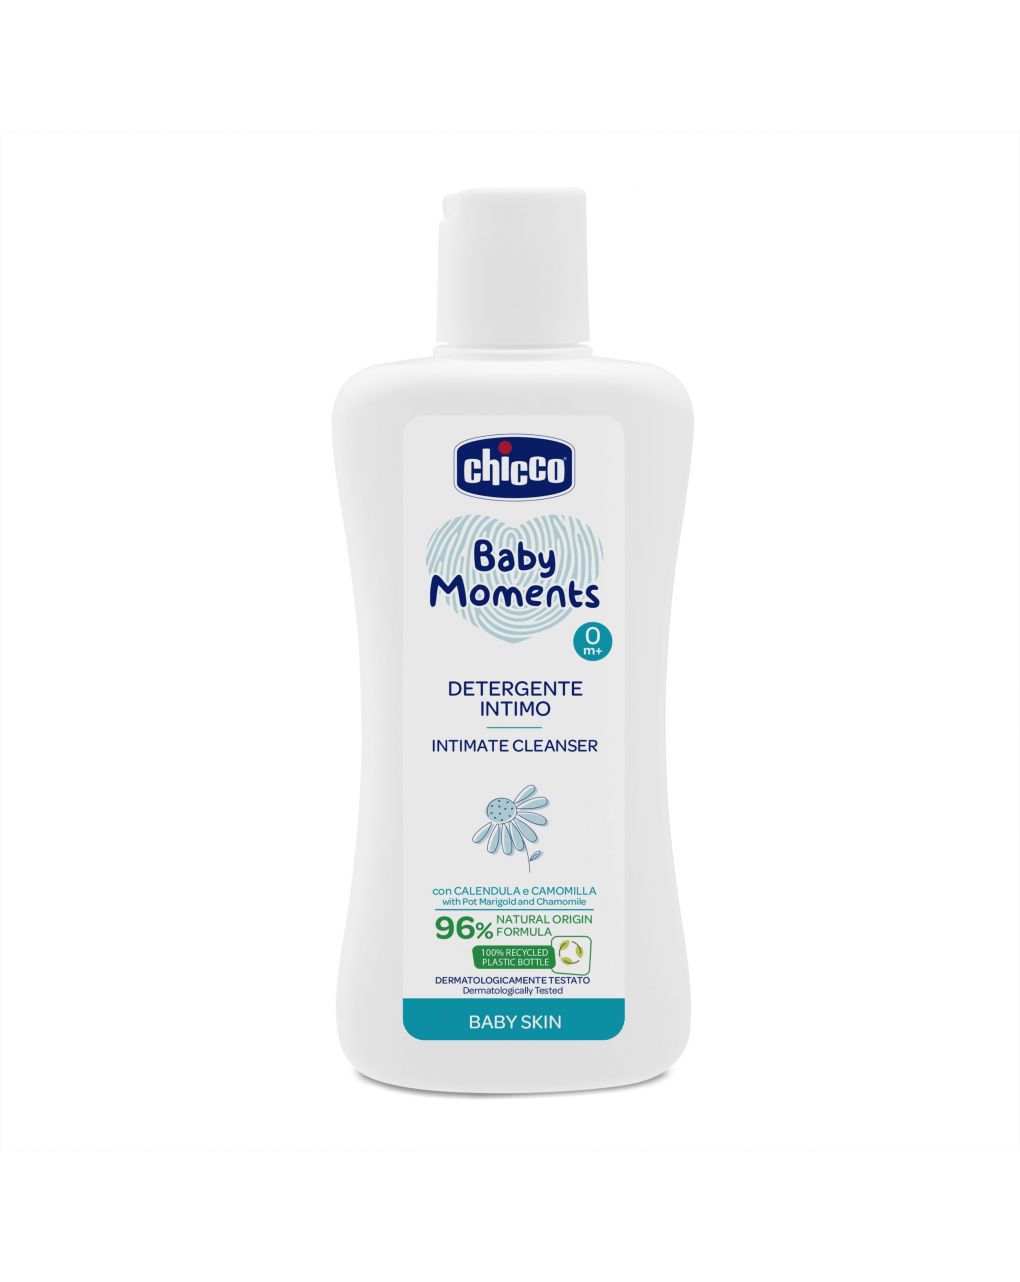 Baby moments detergente intimo chicco baby skin - Prénatal